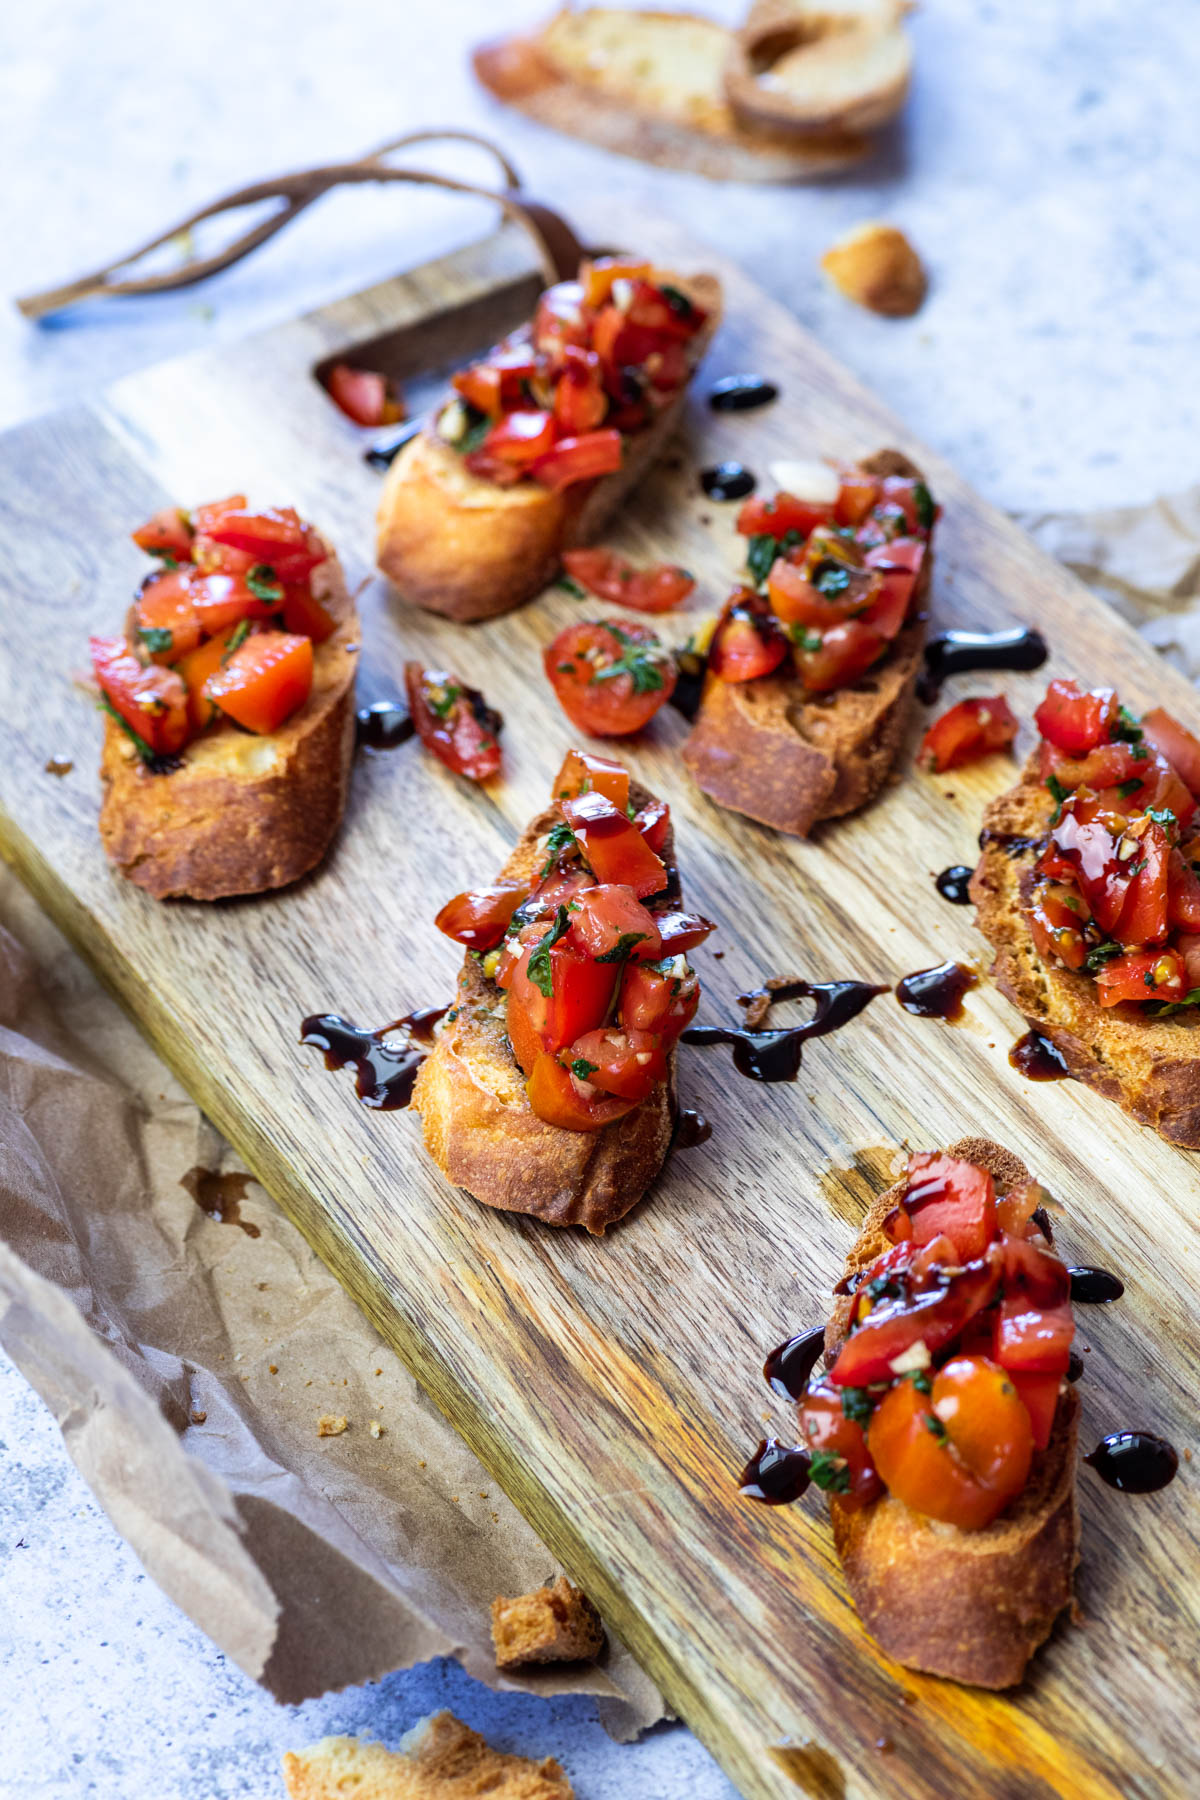 Bruschetta Crostinis served on a wooden board with one crostini in focus.